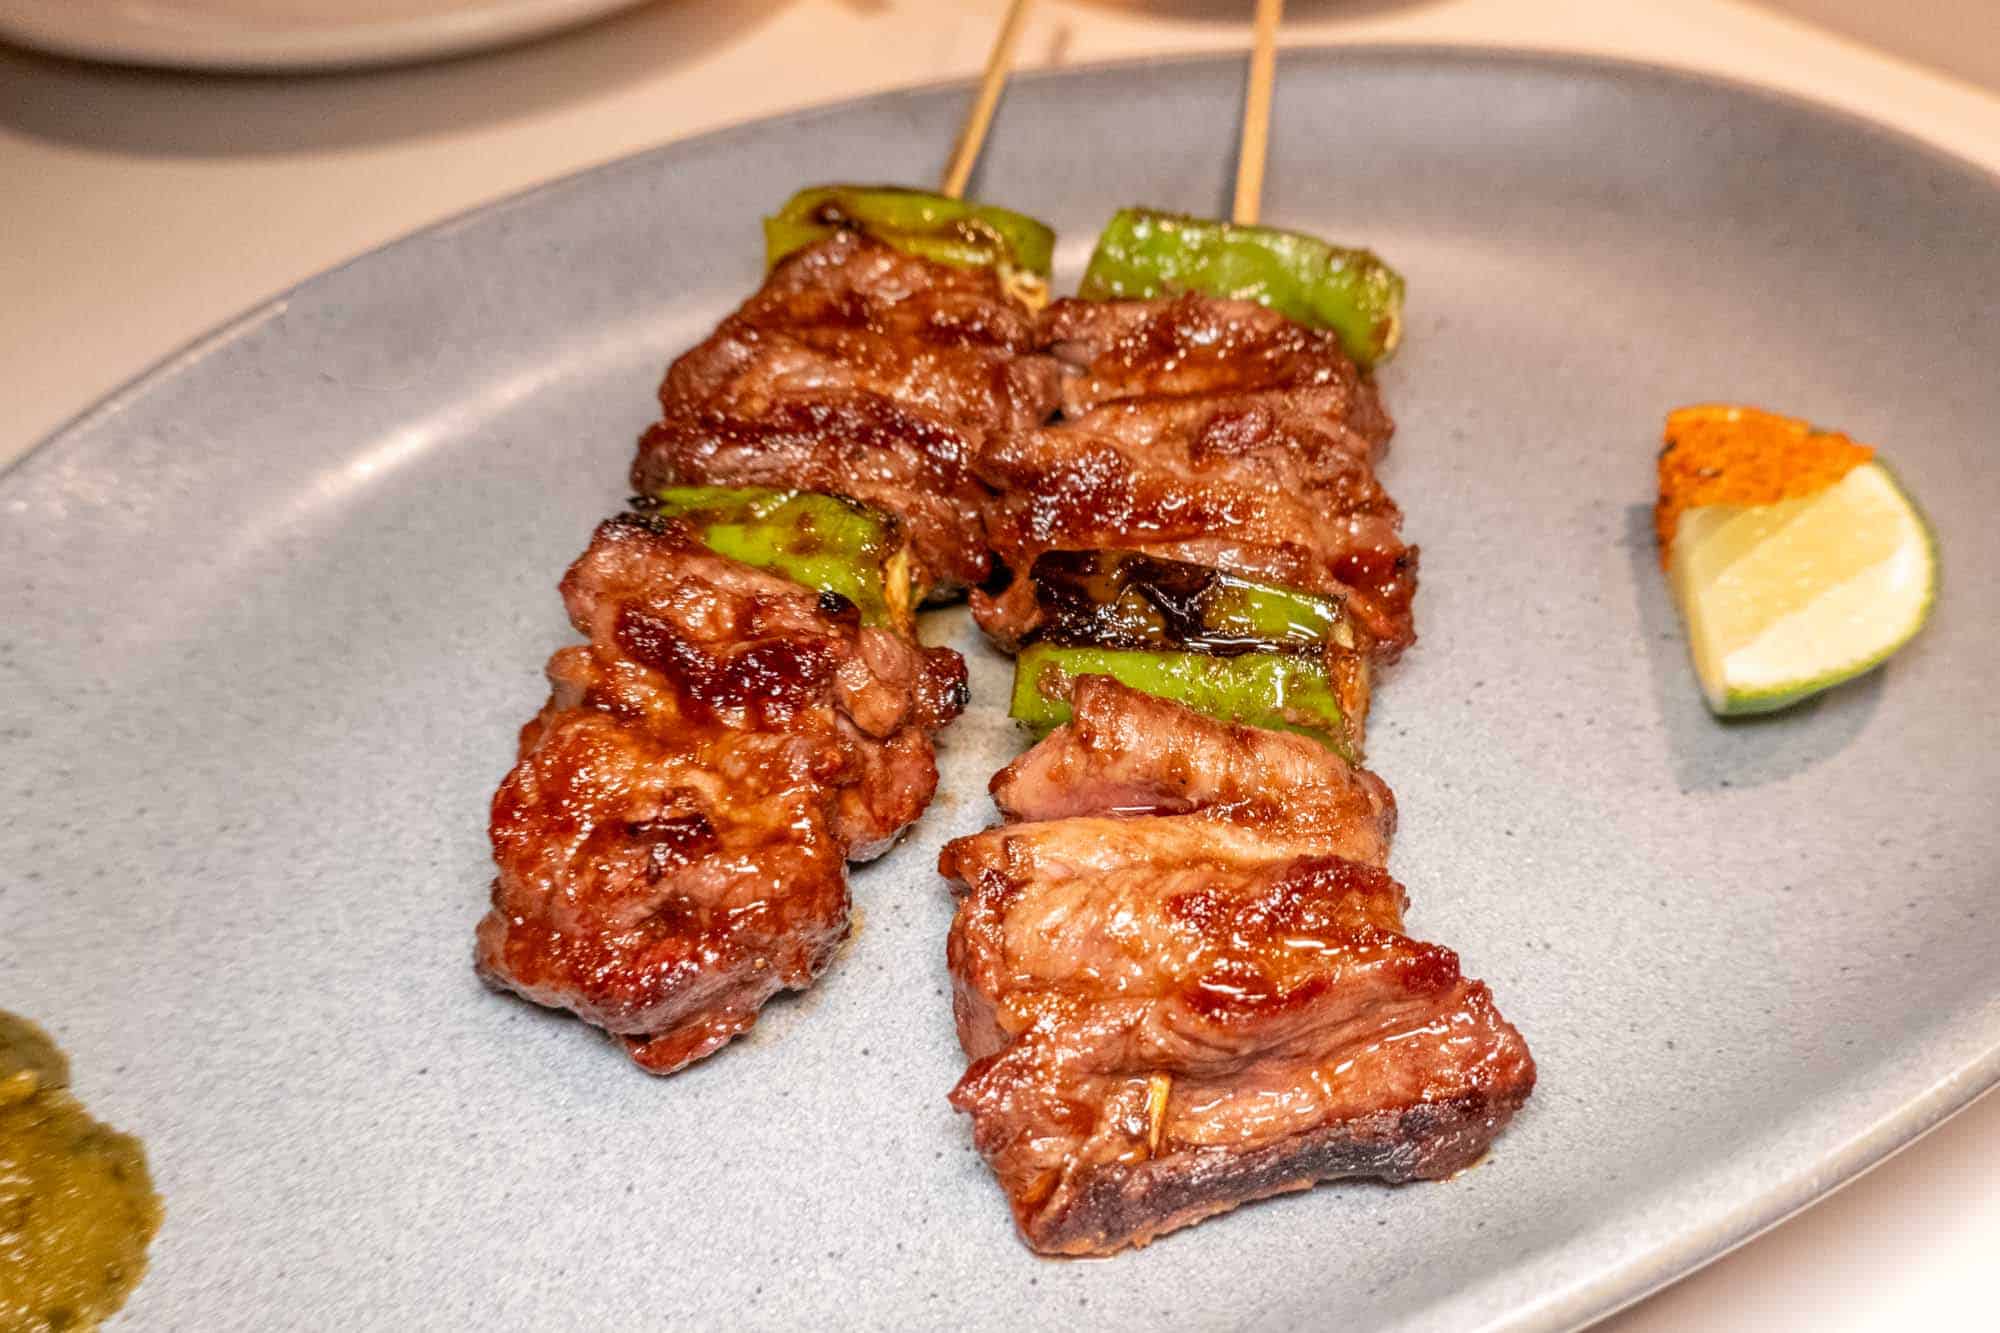 Skewers of short rib from the robata grill